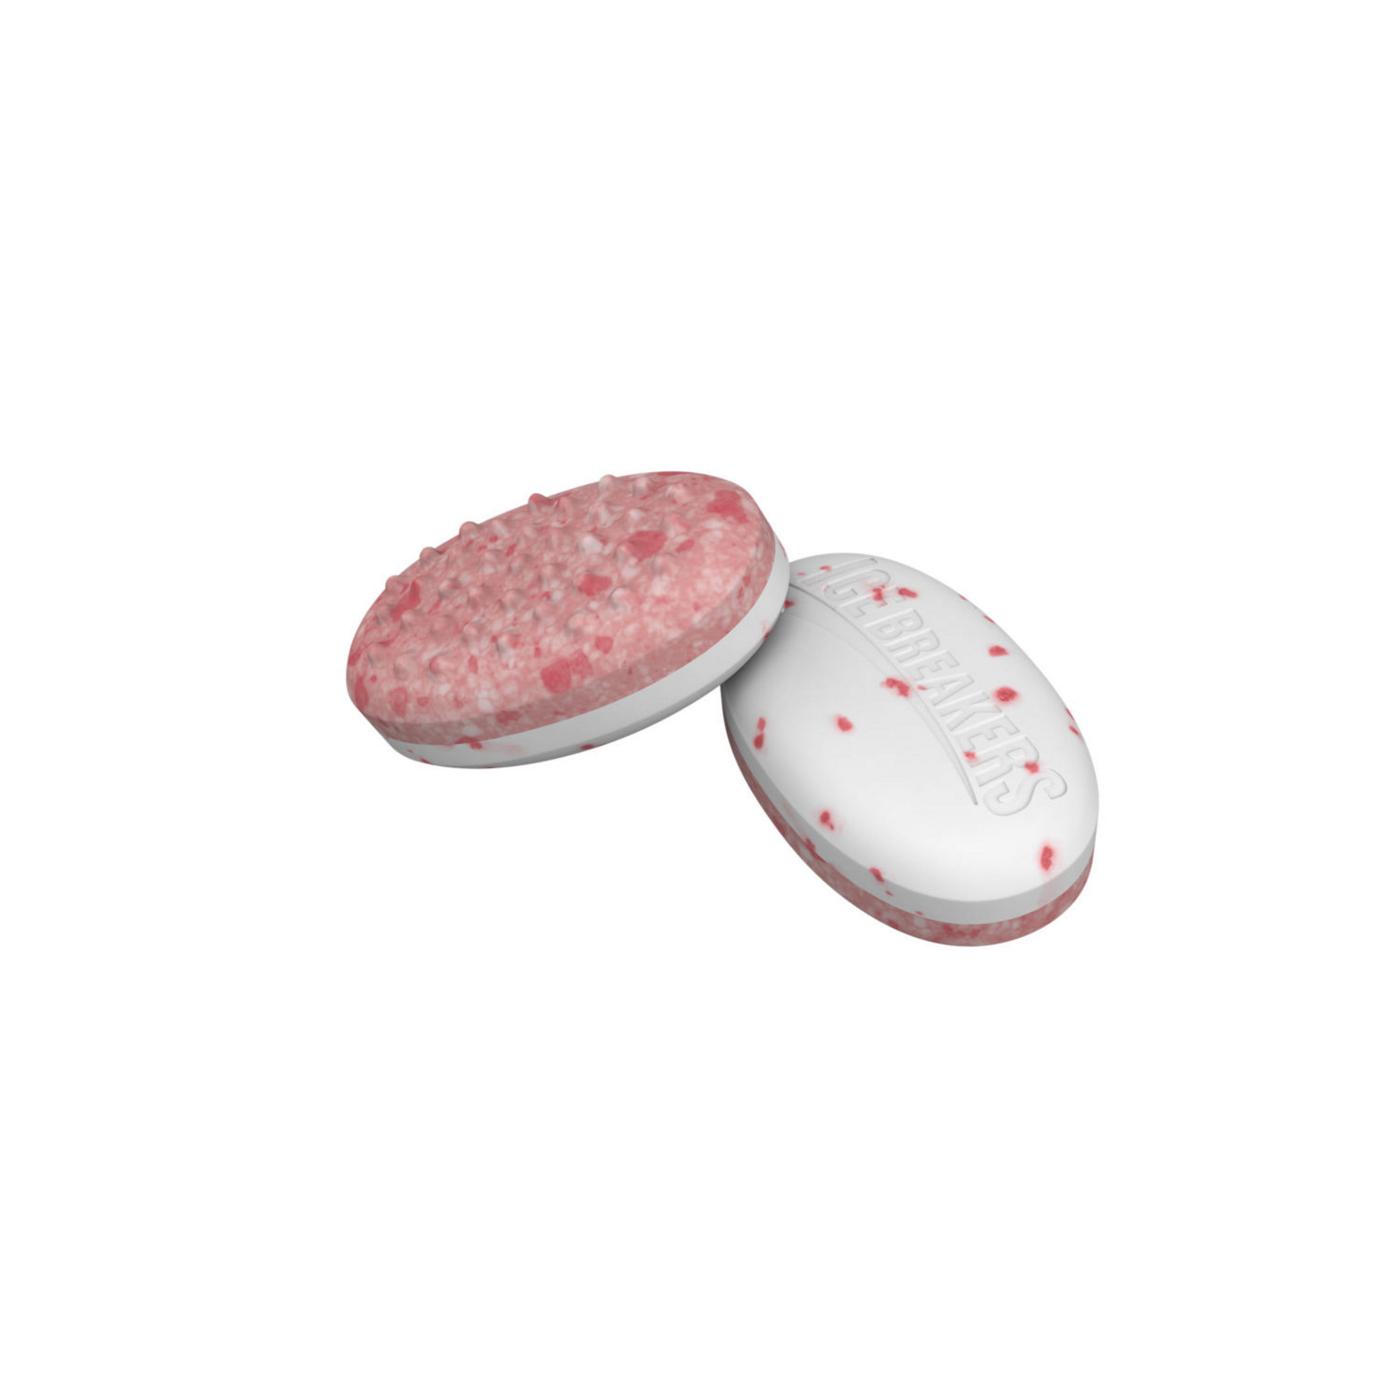 Ice Breakers Duo Fruit Plus Cool Strawberry Sugar Free Mints; image 7 of 7